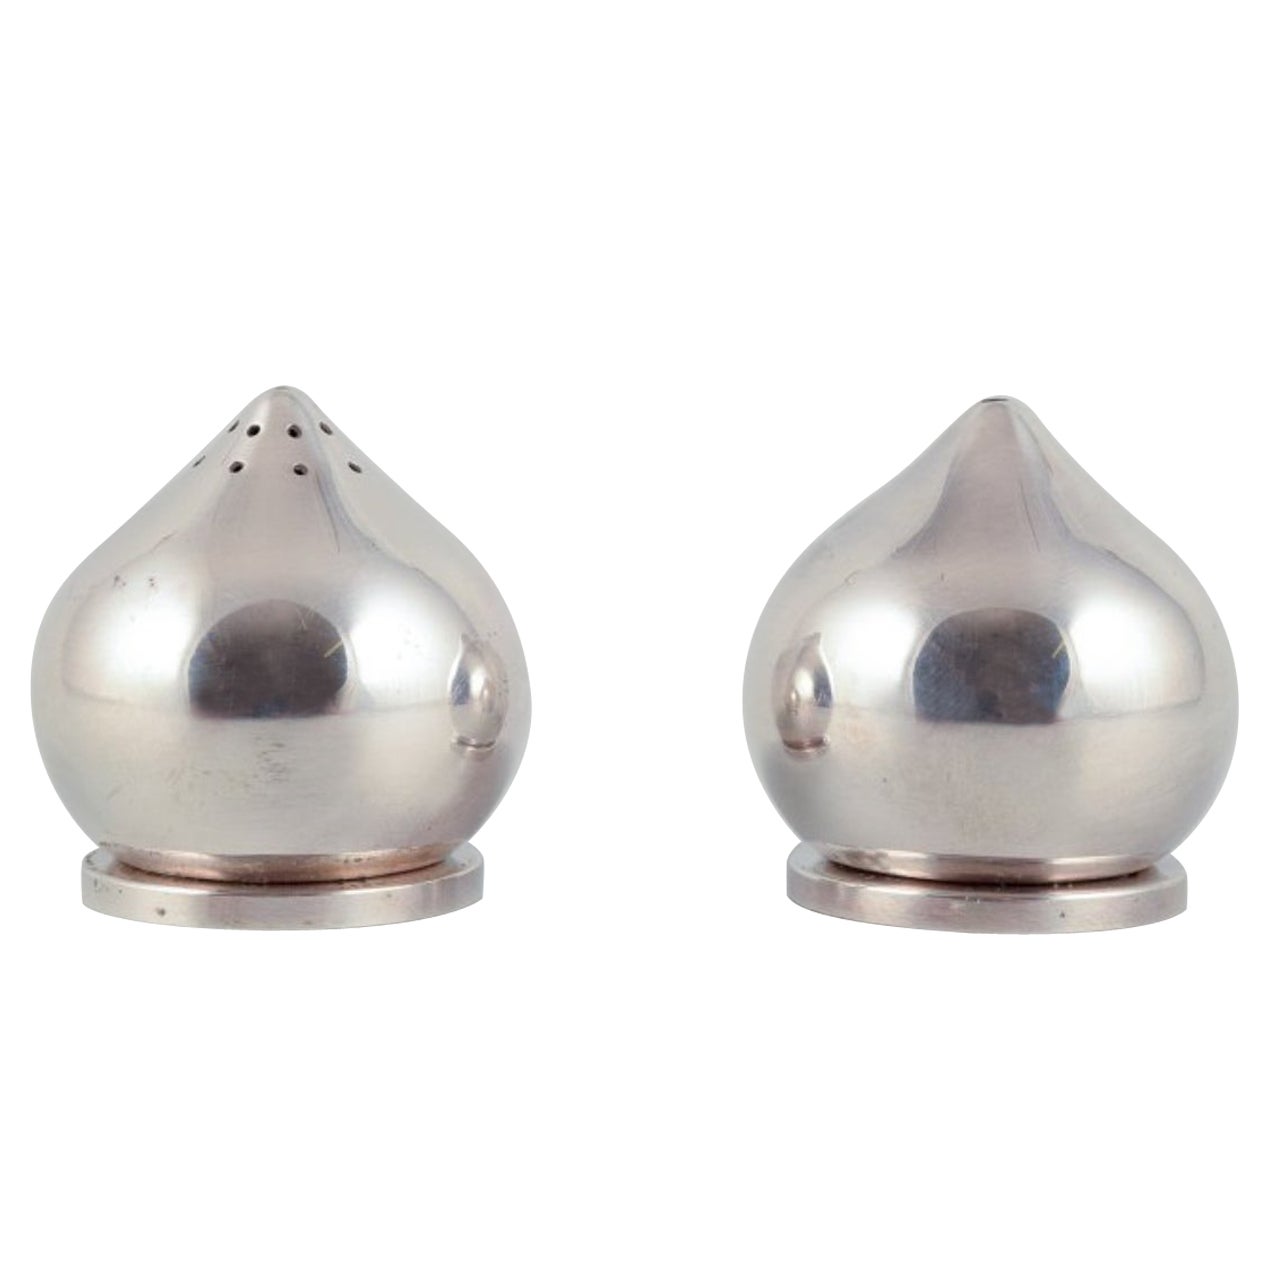 Aage Weimar, Danish silversmith.  A pair of modernist salt and pepper shakers. For Sale